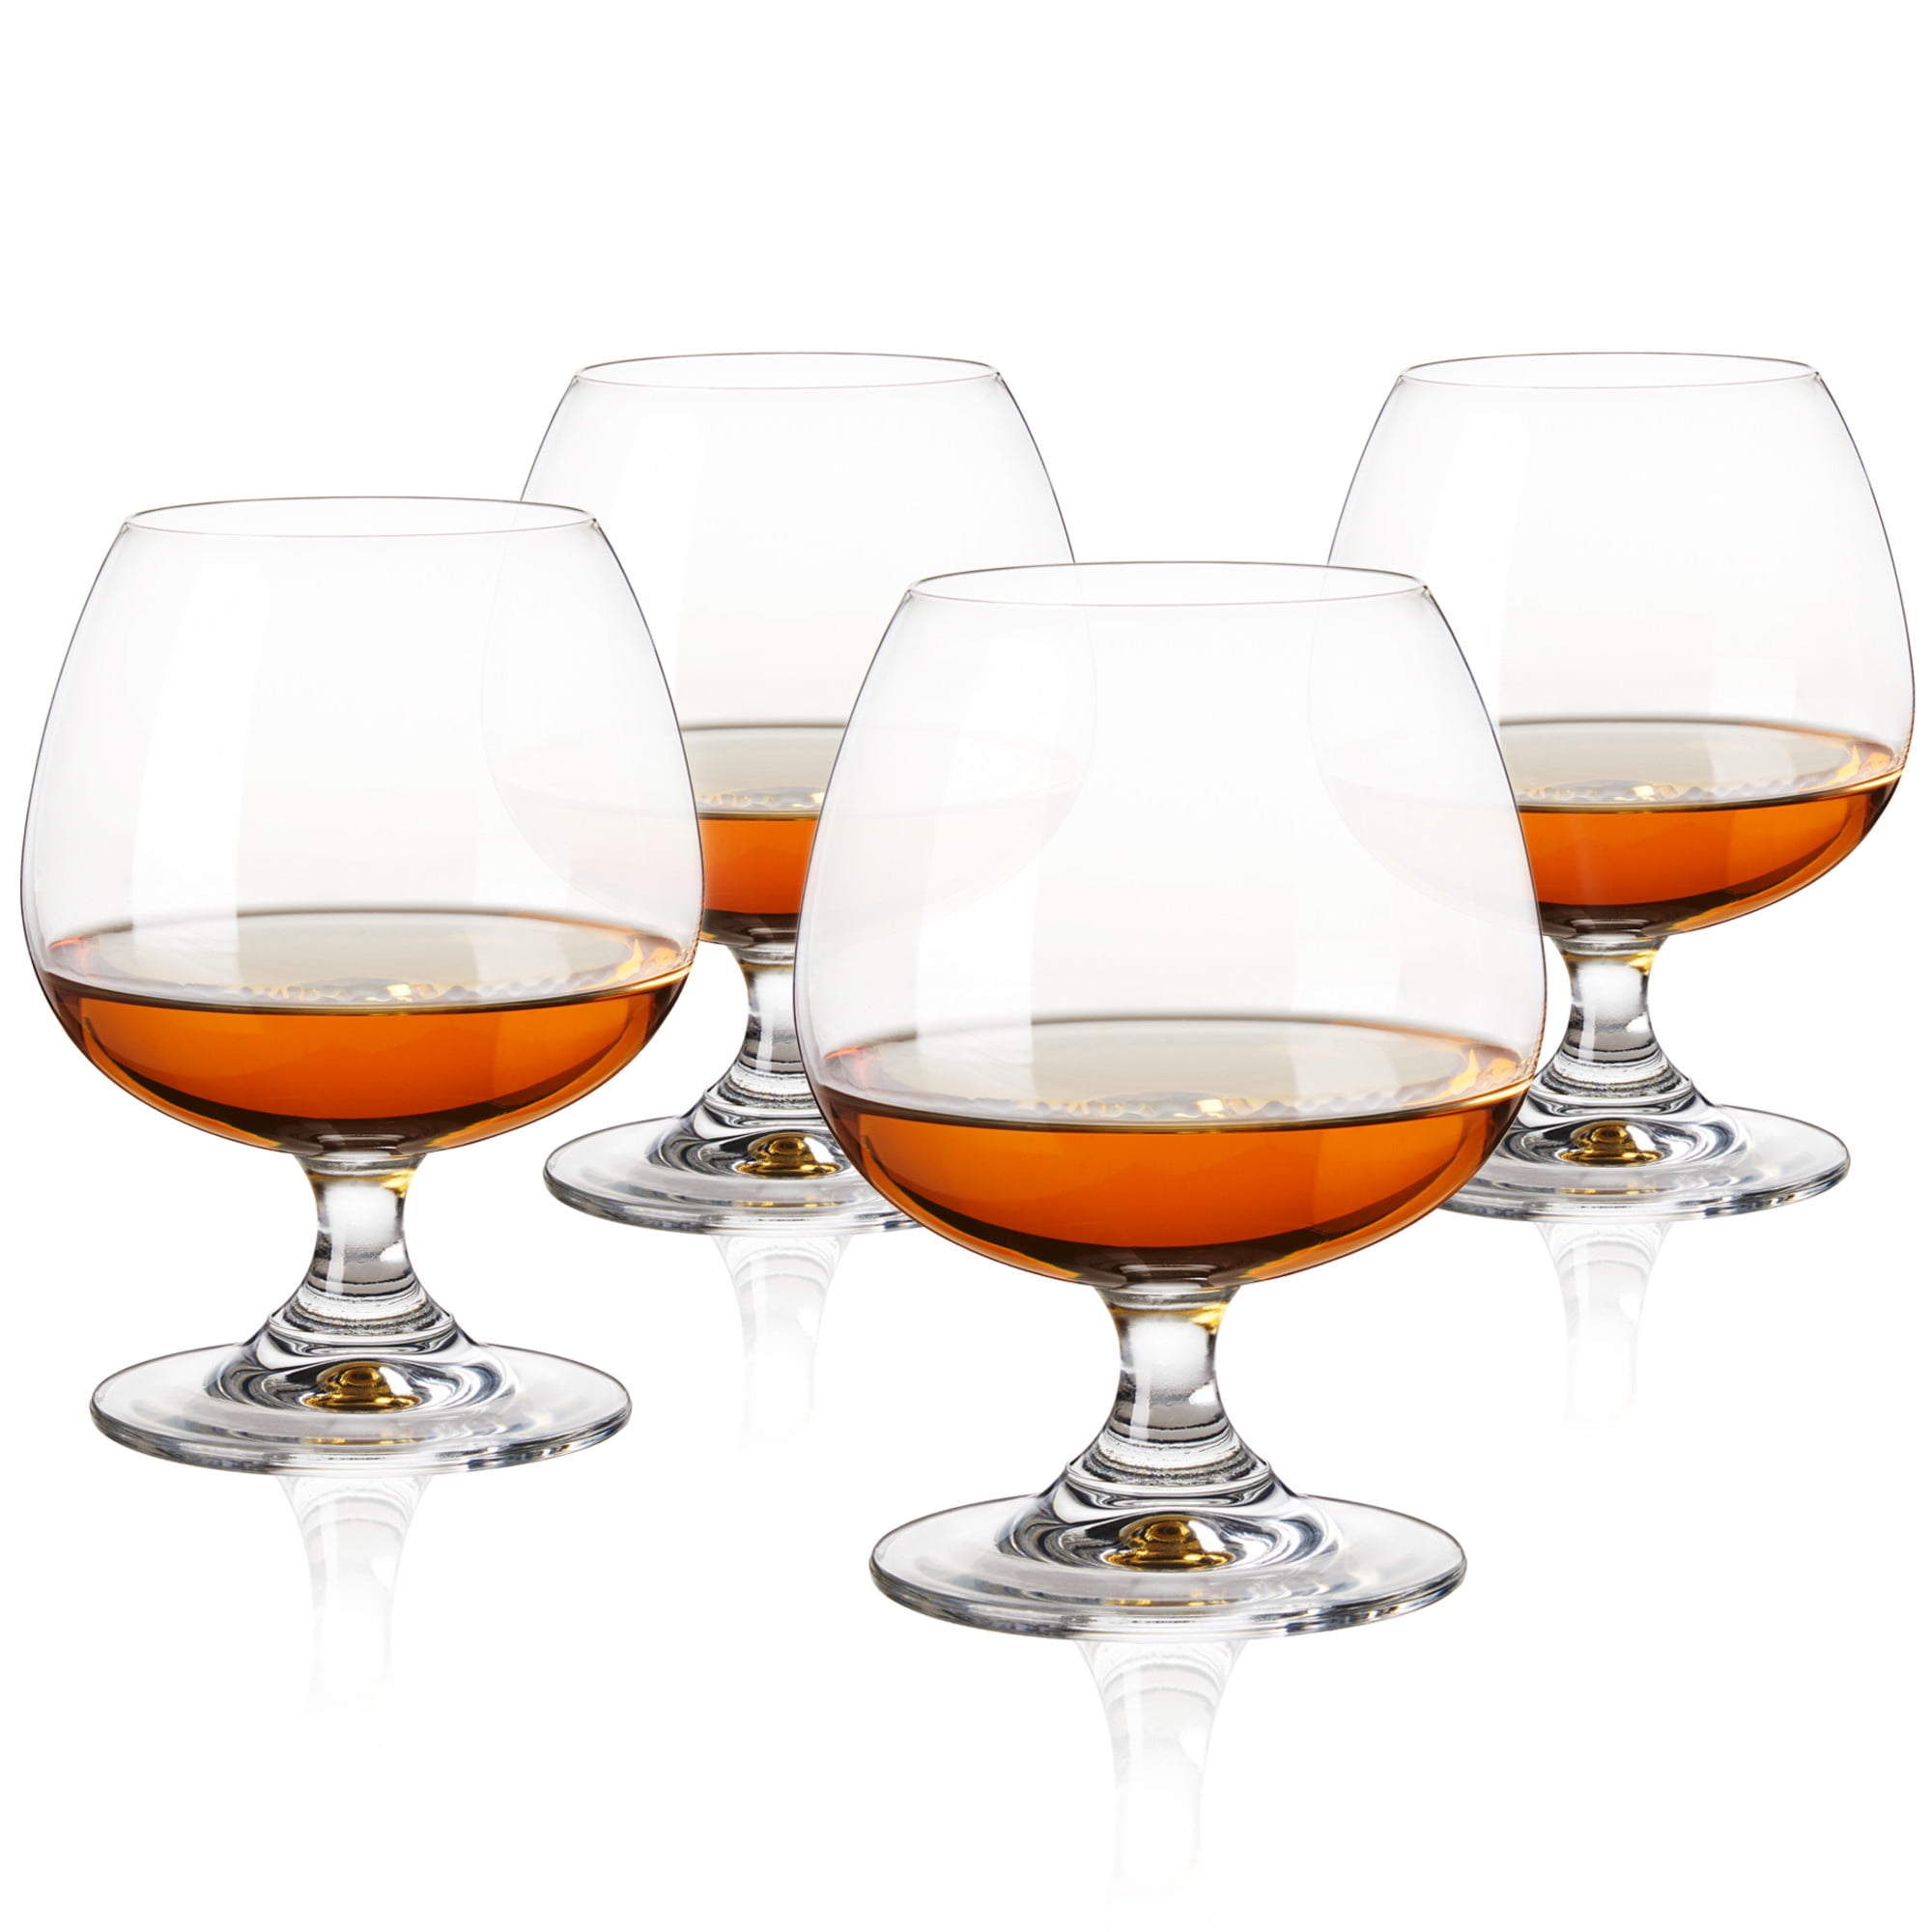 Yellow Spring Rainbow 13.5-ounce Brandy Snifter Glasses, Drinking Set for  Brandy, Bourbon, Whiskey, Snifter Drinkware Set, Set of 3 